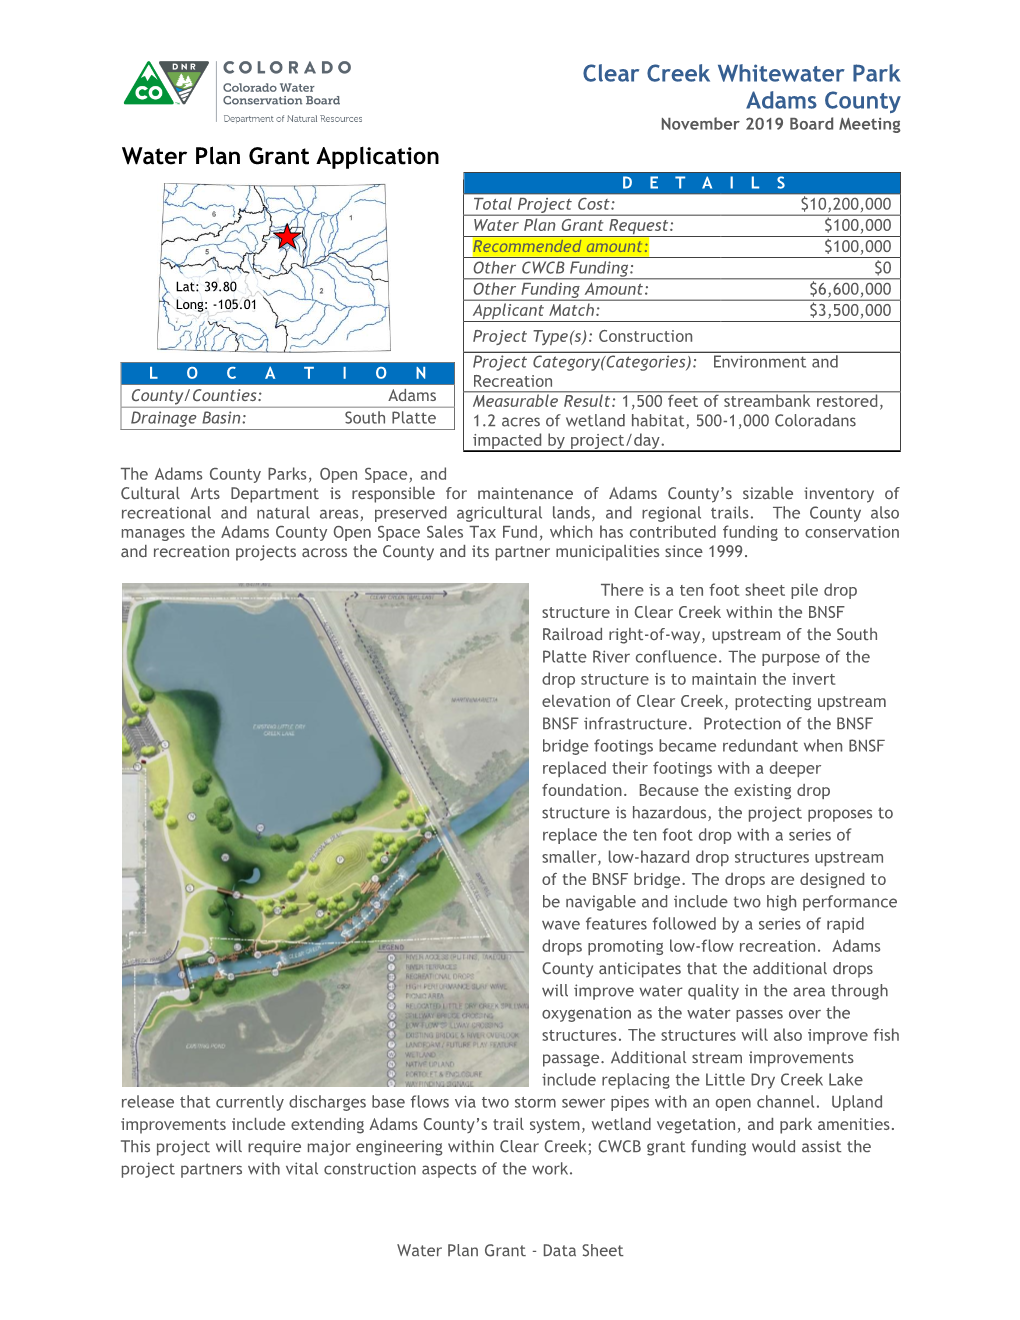 Clear Creek Whitewater Park Adams County Water Plan Grant Application